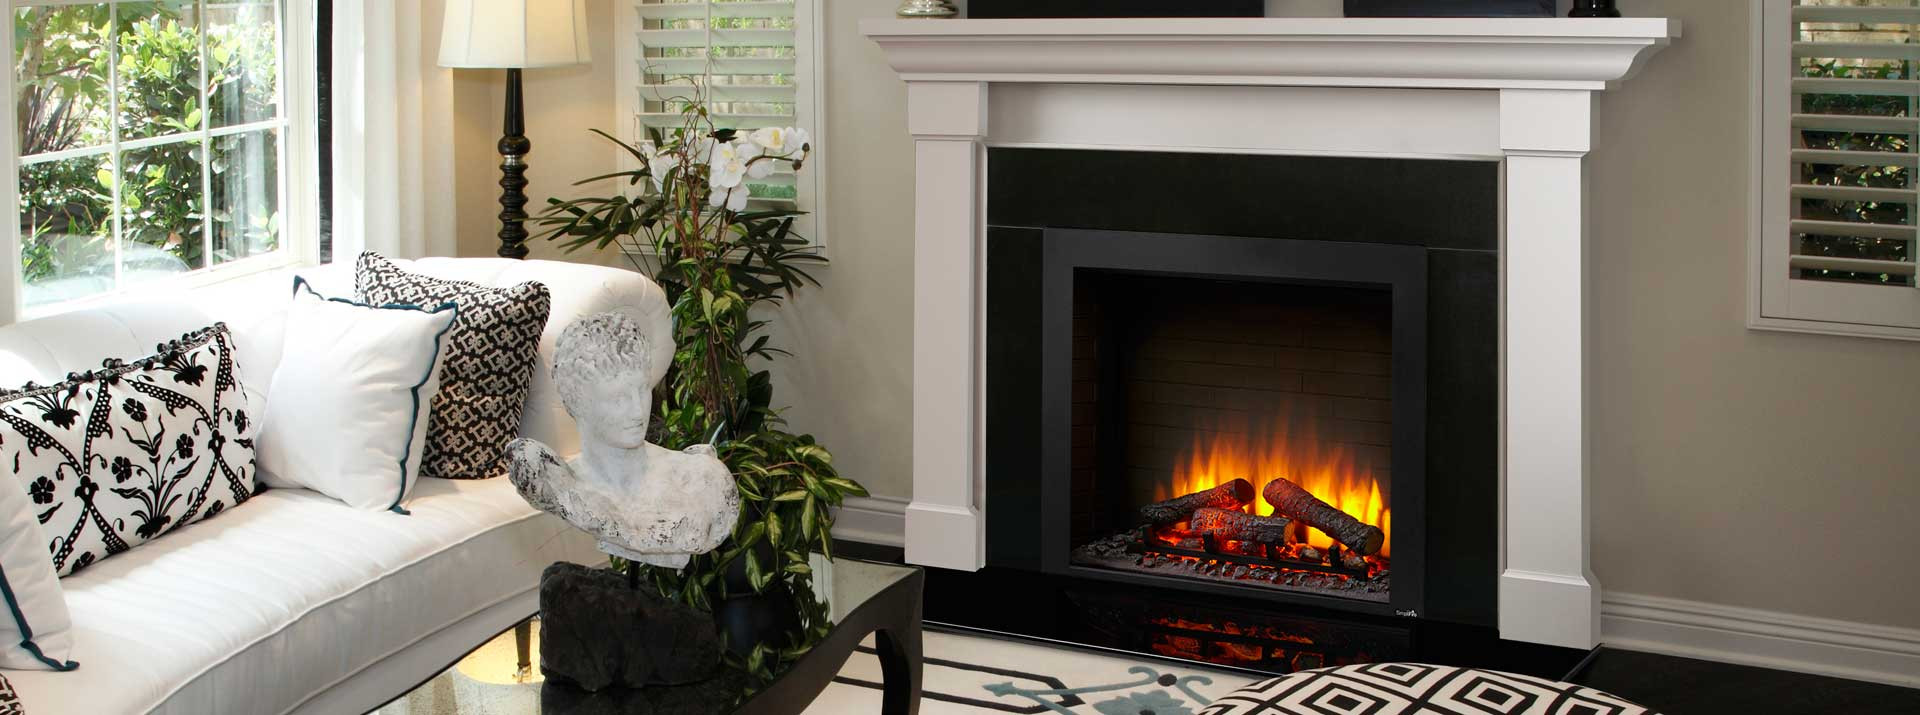 Electric Fireplace Built In
 SimpliFire Built In Electric Fireplace Series